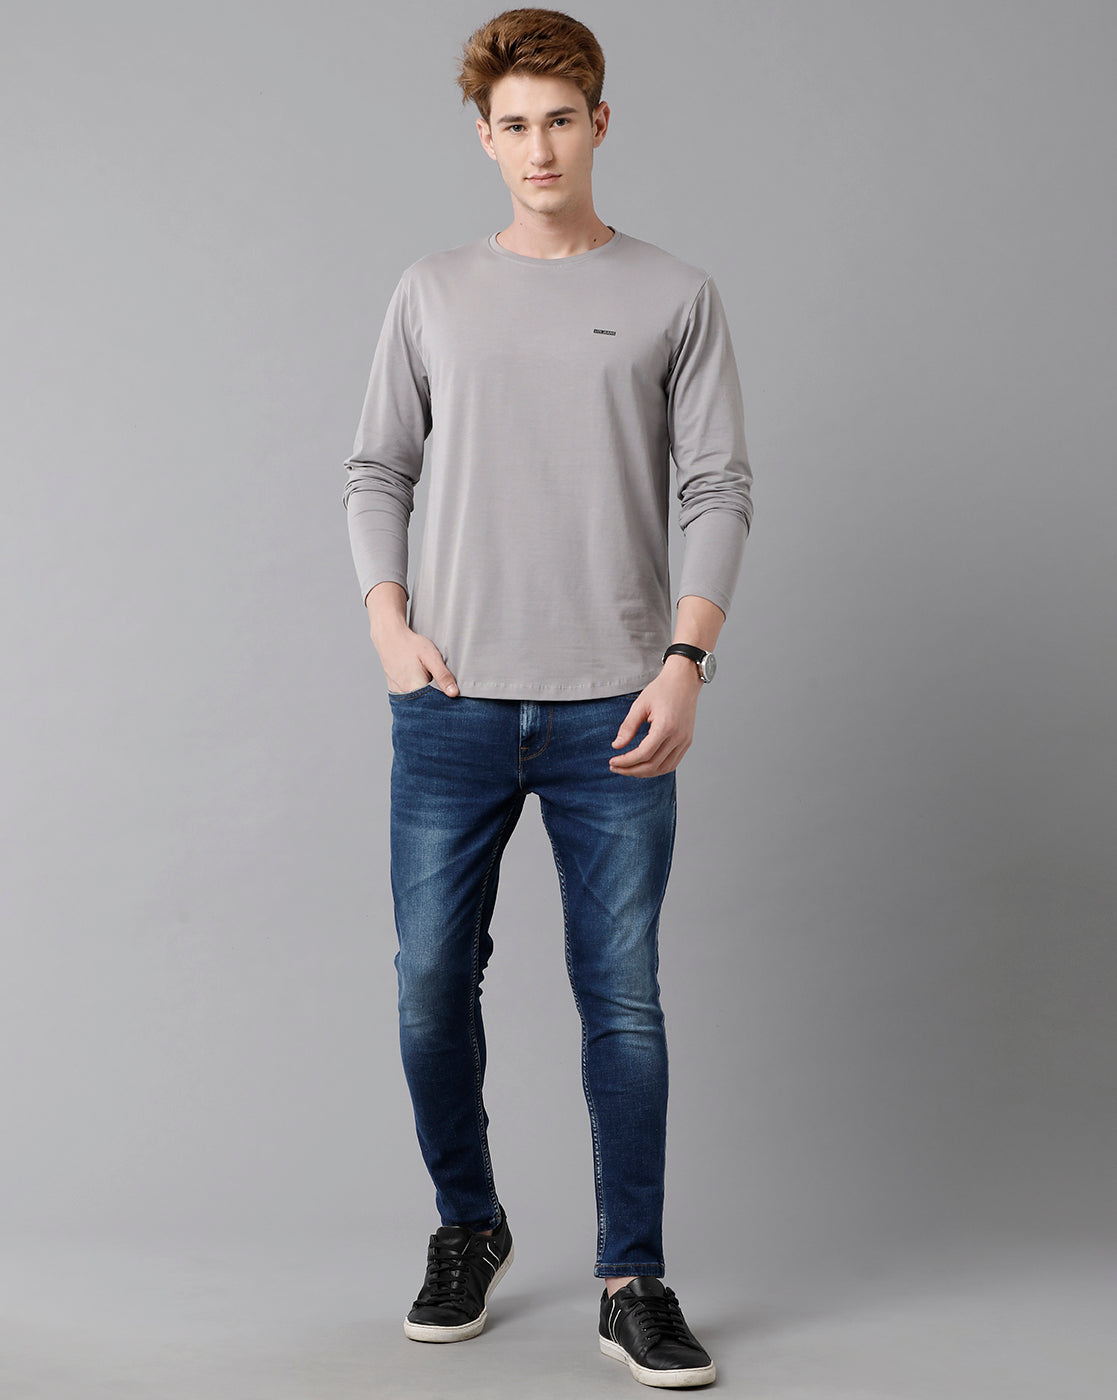 Jeans: Buy Men's Indigo Skinny Fit Cropped Length Jeans | VOI Jeans ...